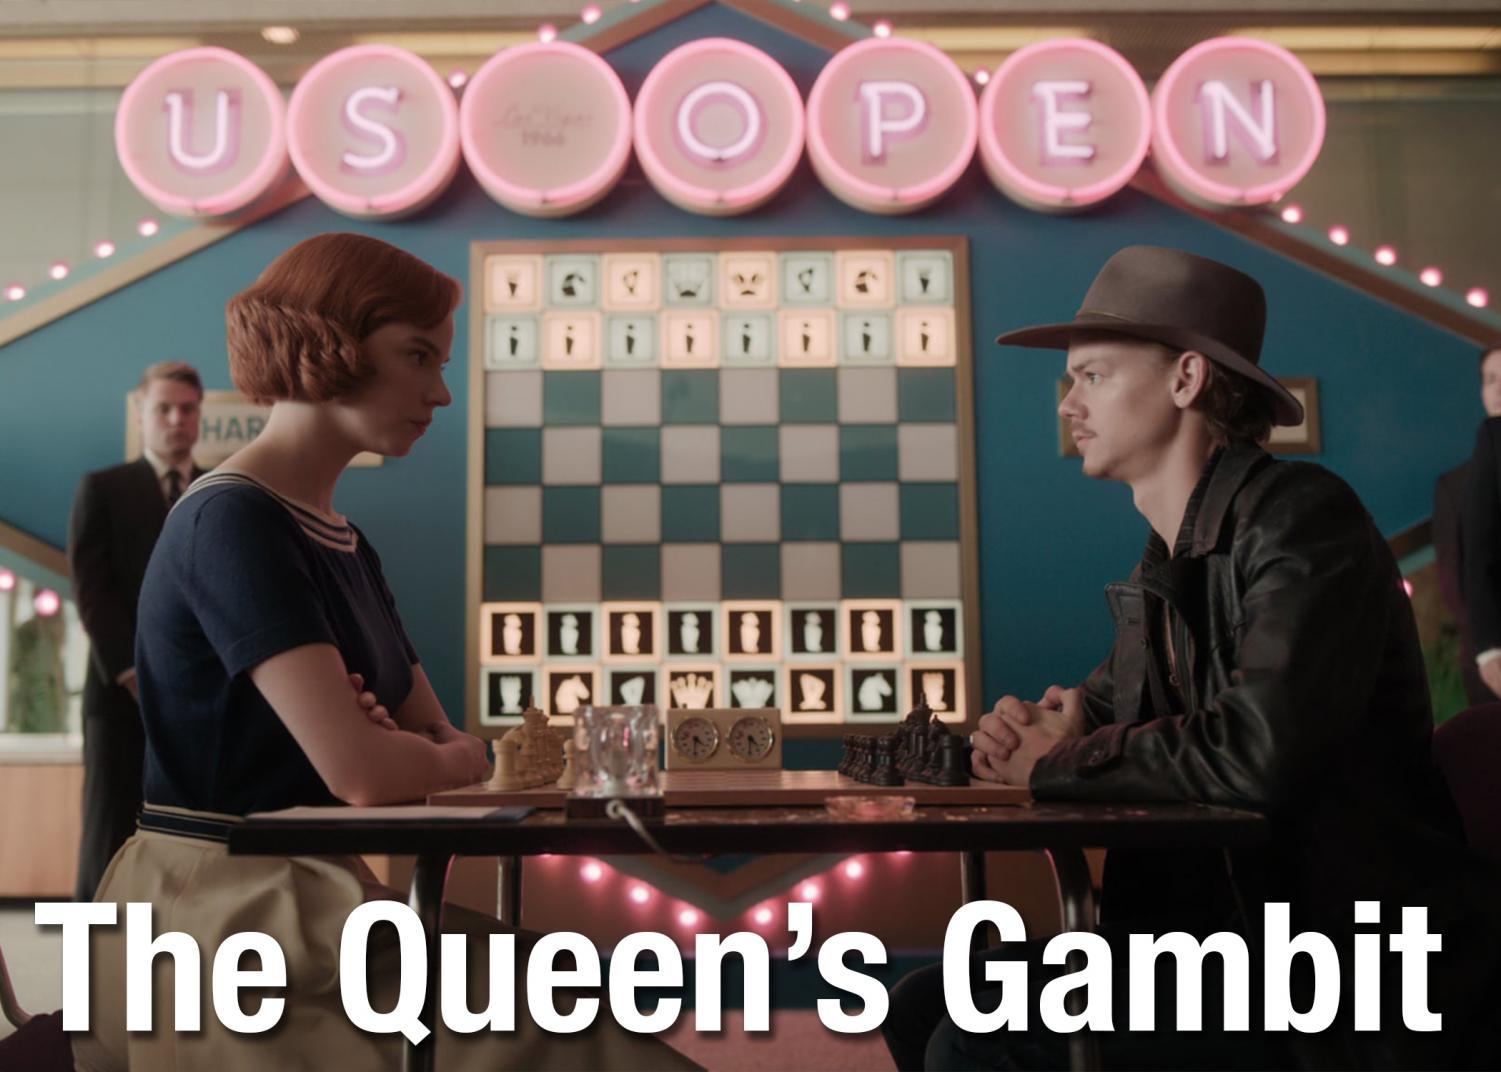 What Makes The Queen's Gambit So Addictive?